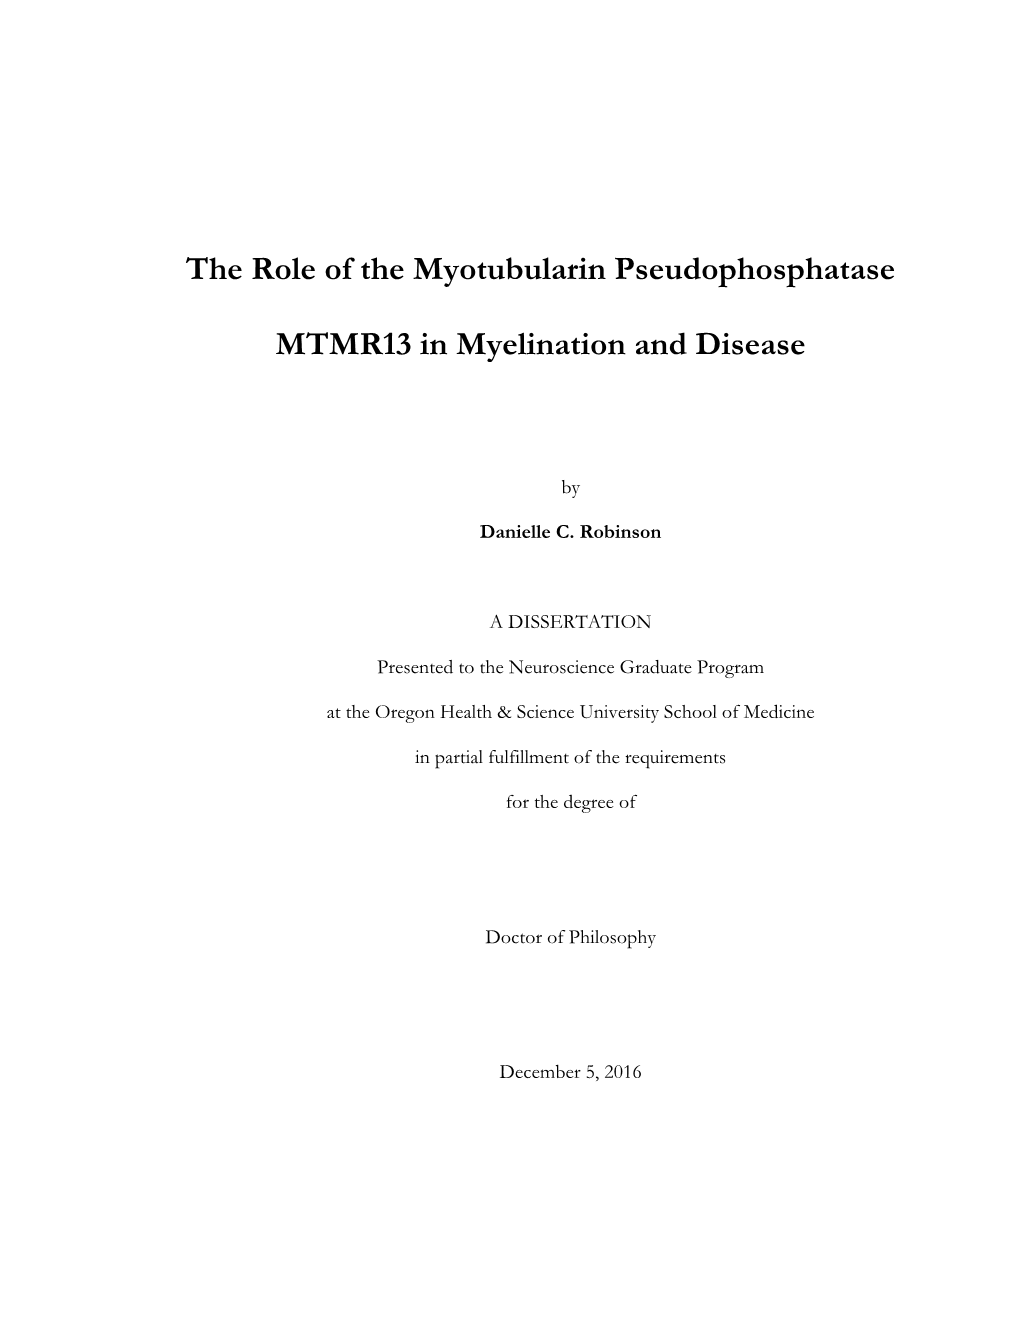 The Role of the Myotubularin Pseudophosphatase MTMR13 In